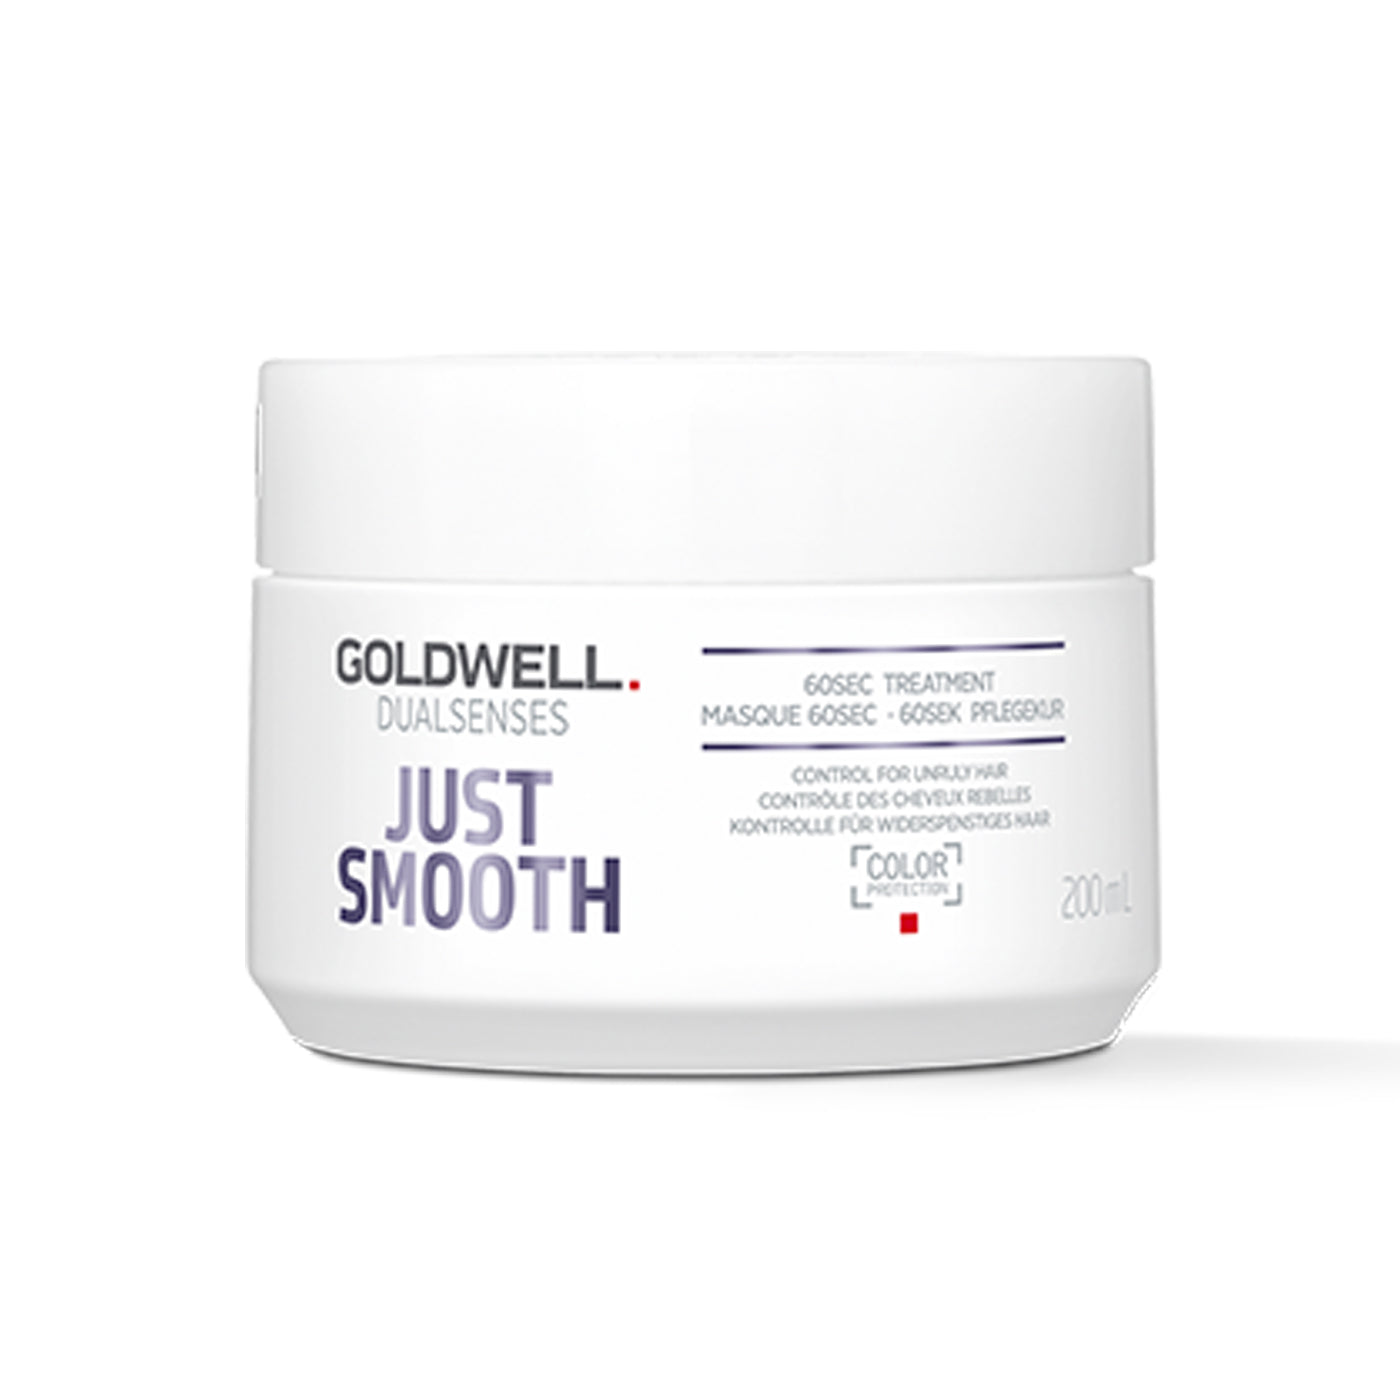 Goldwell DualSenses Just Smooth 60 second Treatment (200ml) - Ultimate Hair and Beauty